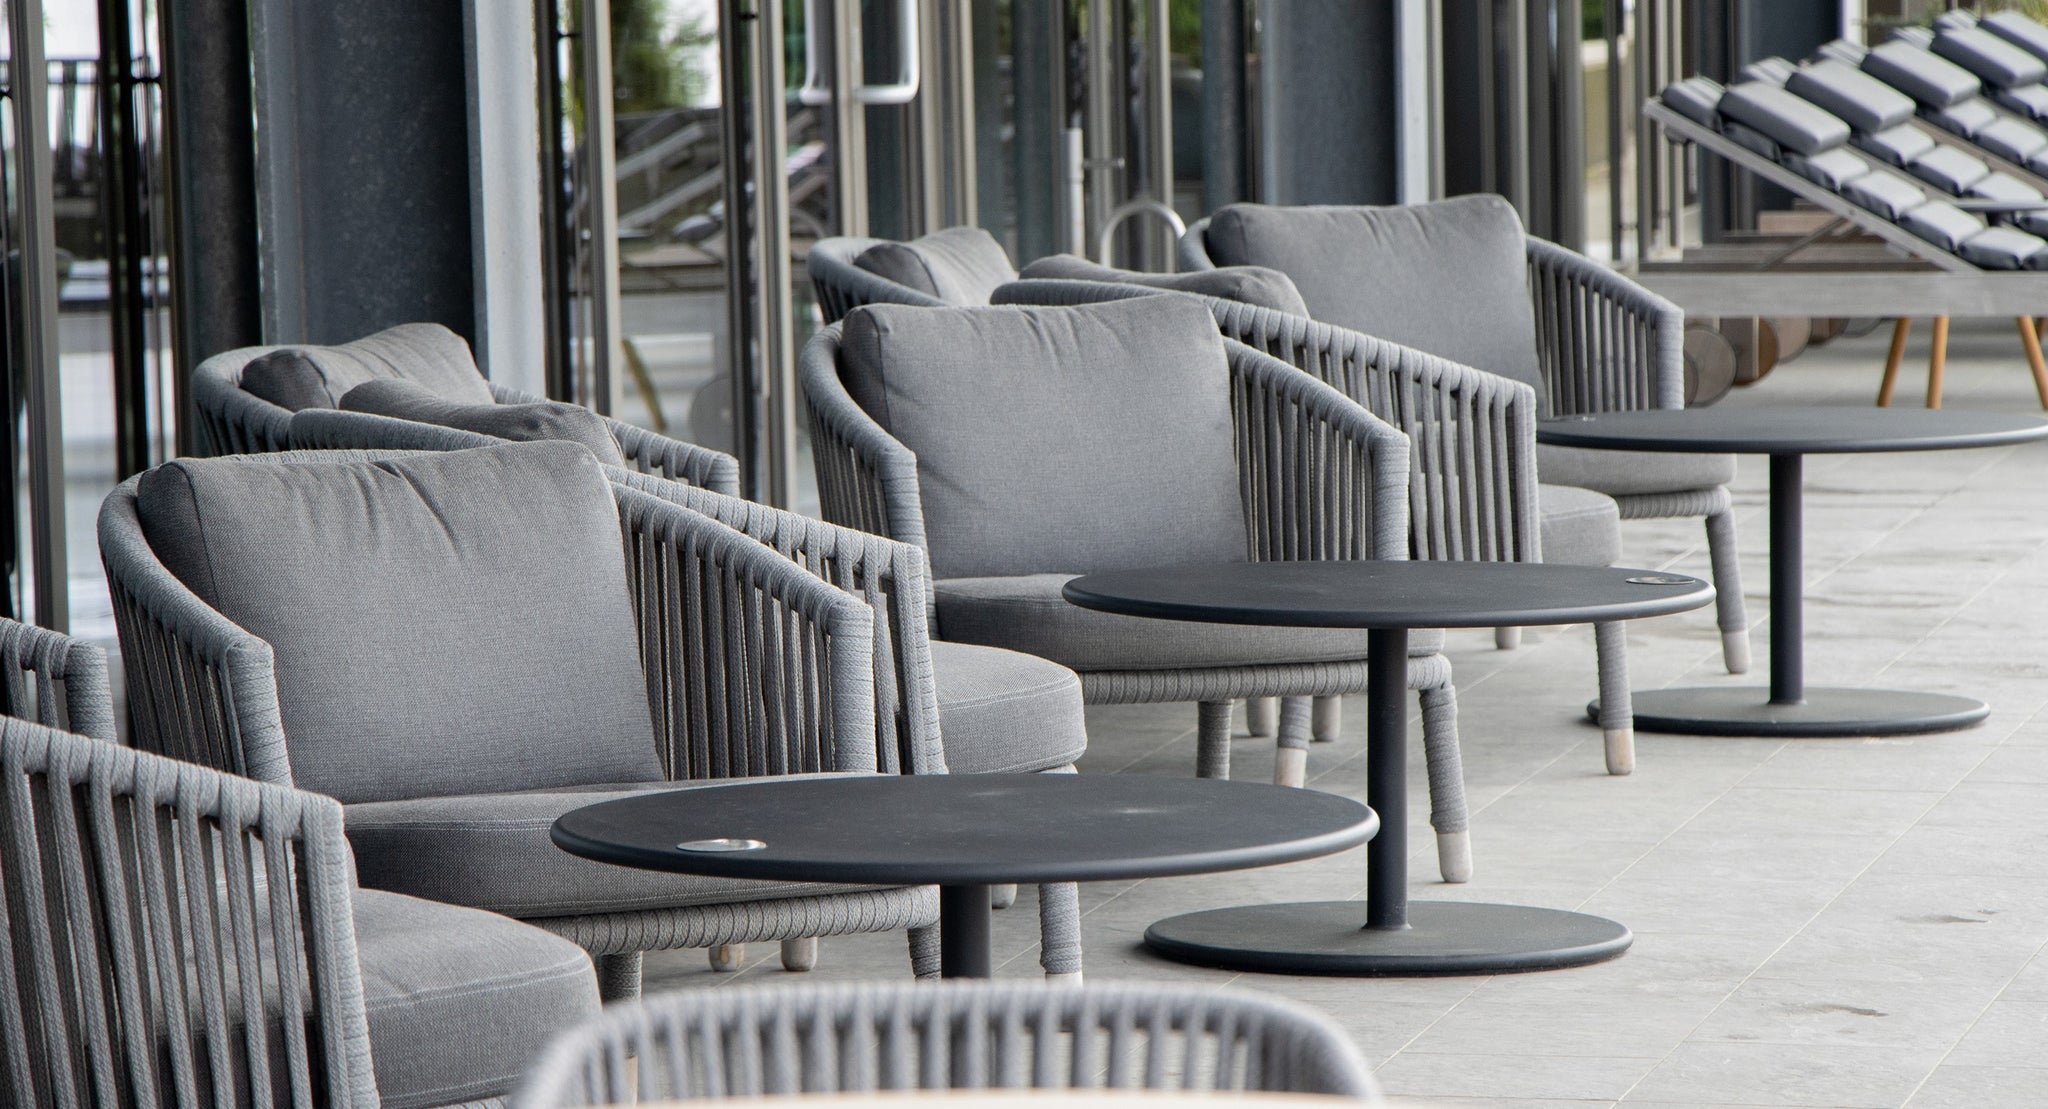 Grey Cane-line Moments lounge chairs at Alsik Norcid Spa & Wellness outdoor terrace with black round coffee tables